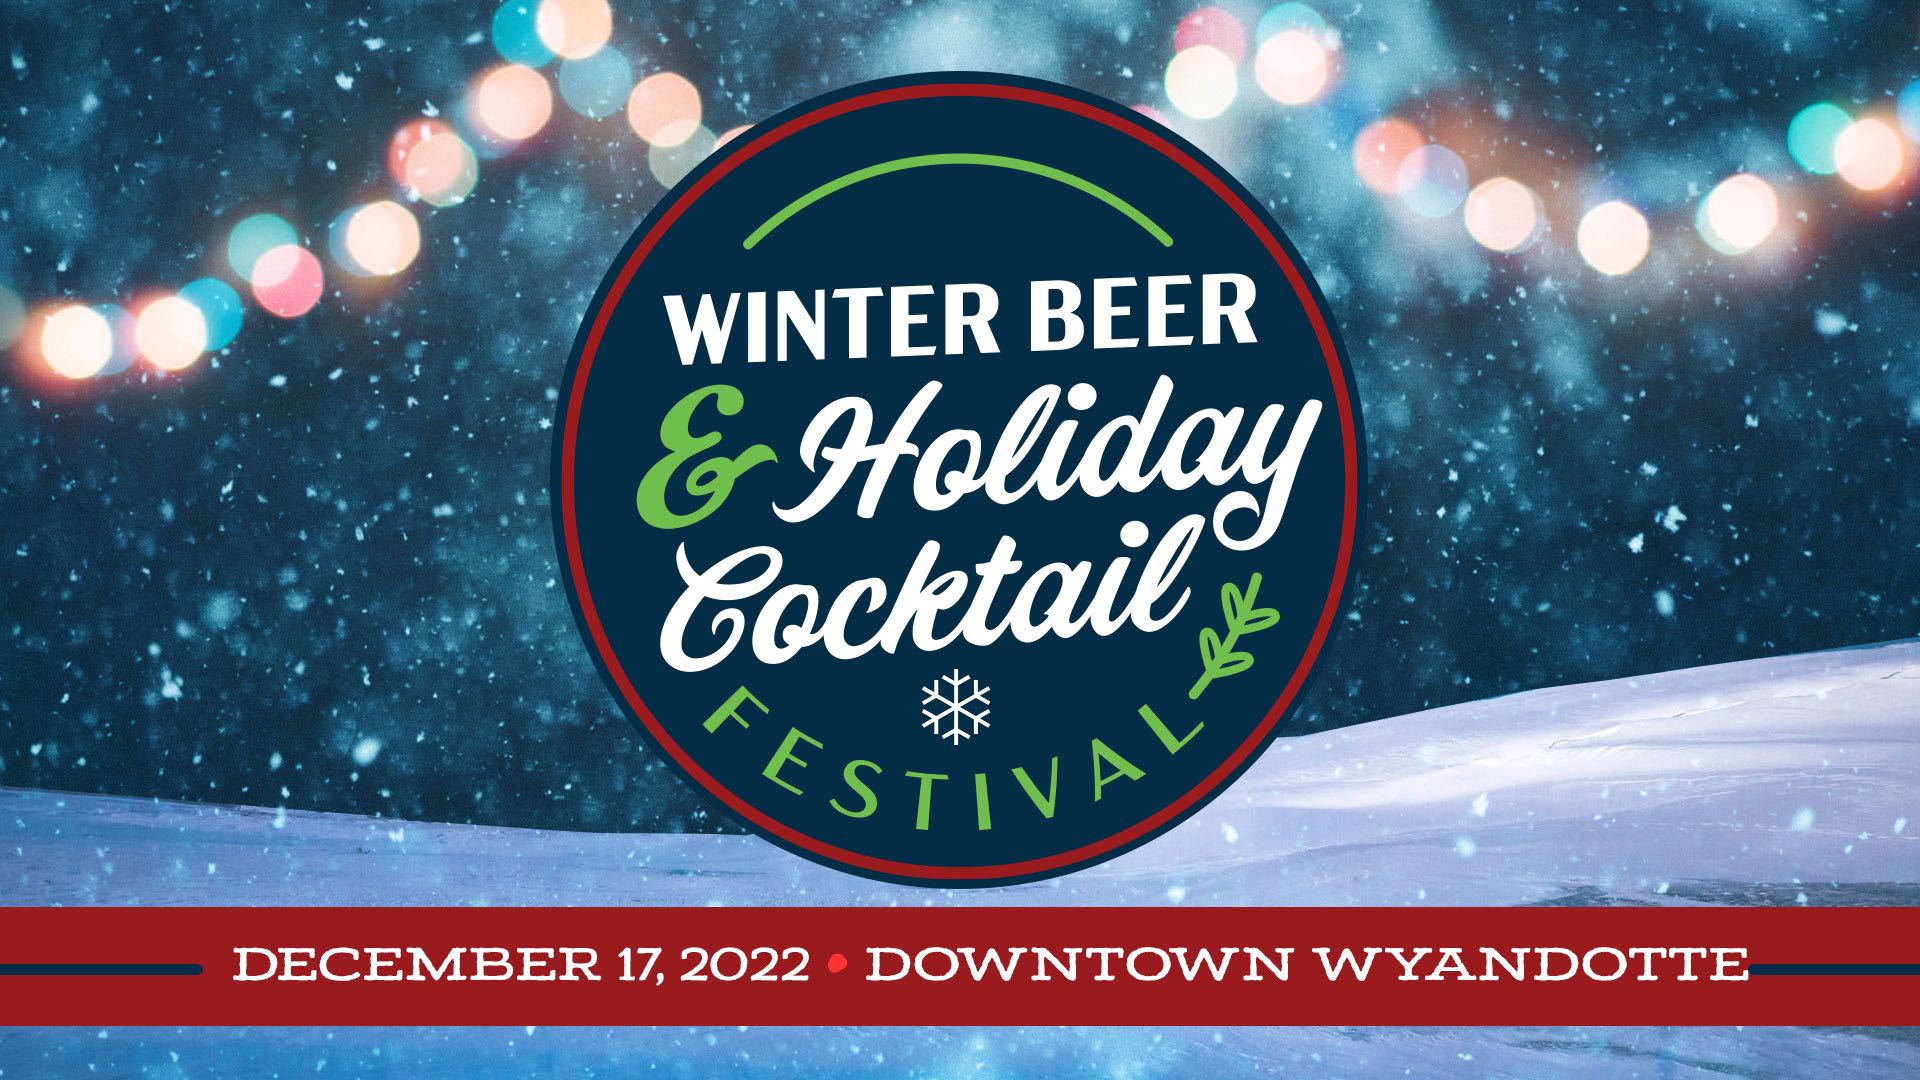 Winter Beer & Holiday Cocktail Festival; December 17, 2022 in Downtown Wyandotte